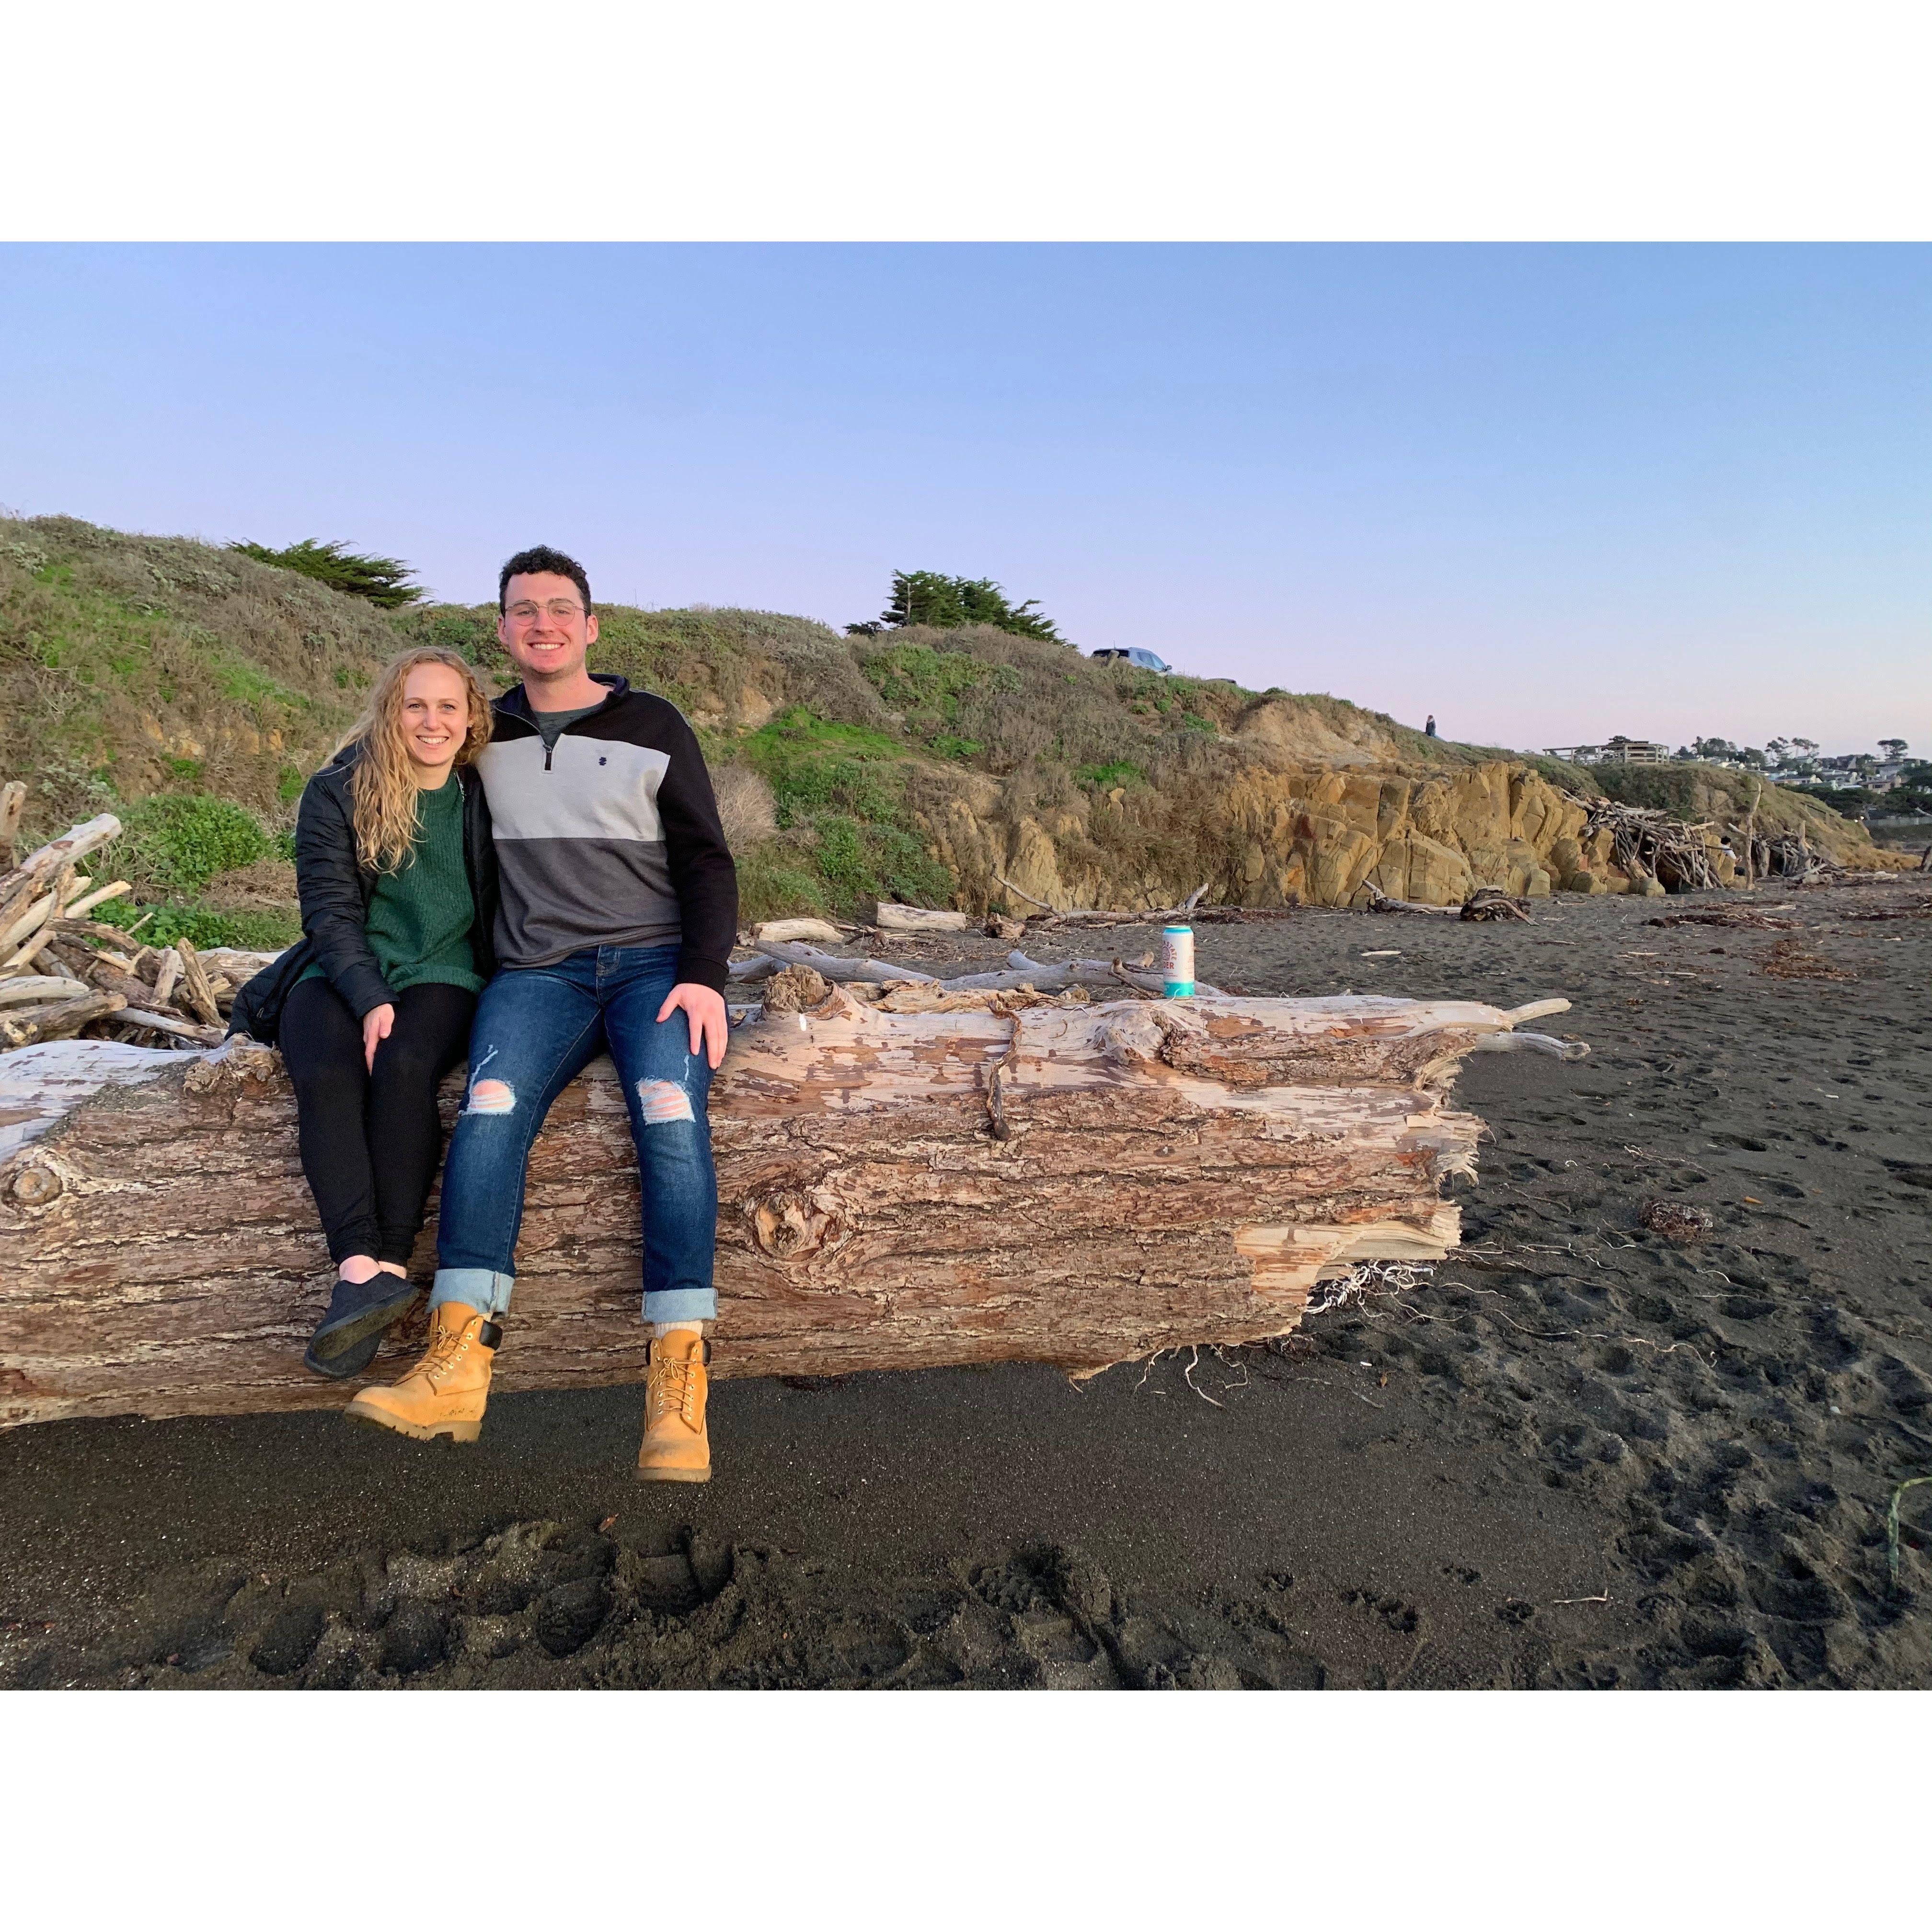 Our first weekend getaway to Cambria, where we enjoyed wine tasting, and Savyon accidentally said, "I love you."